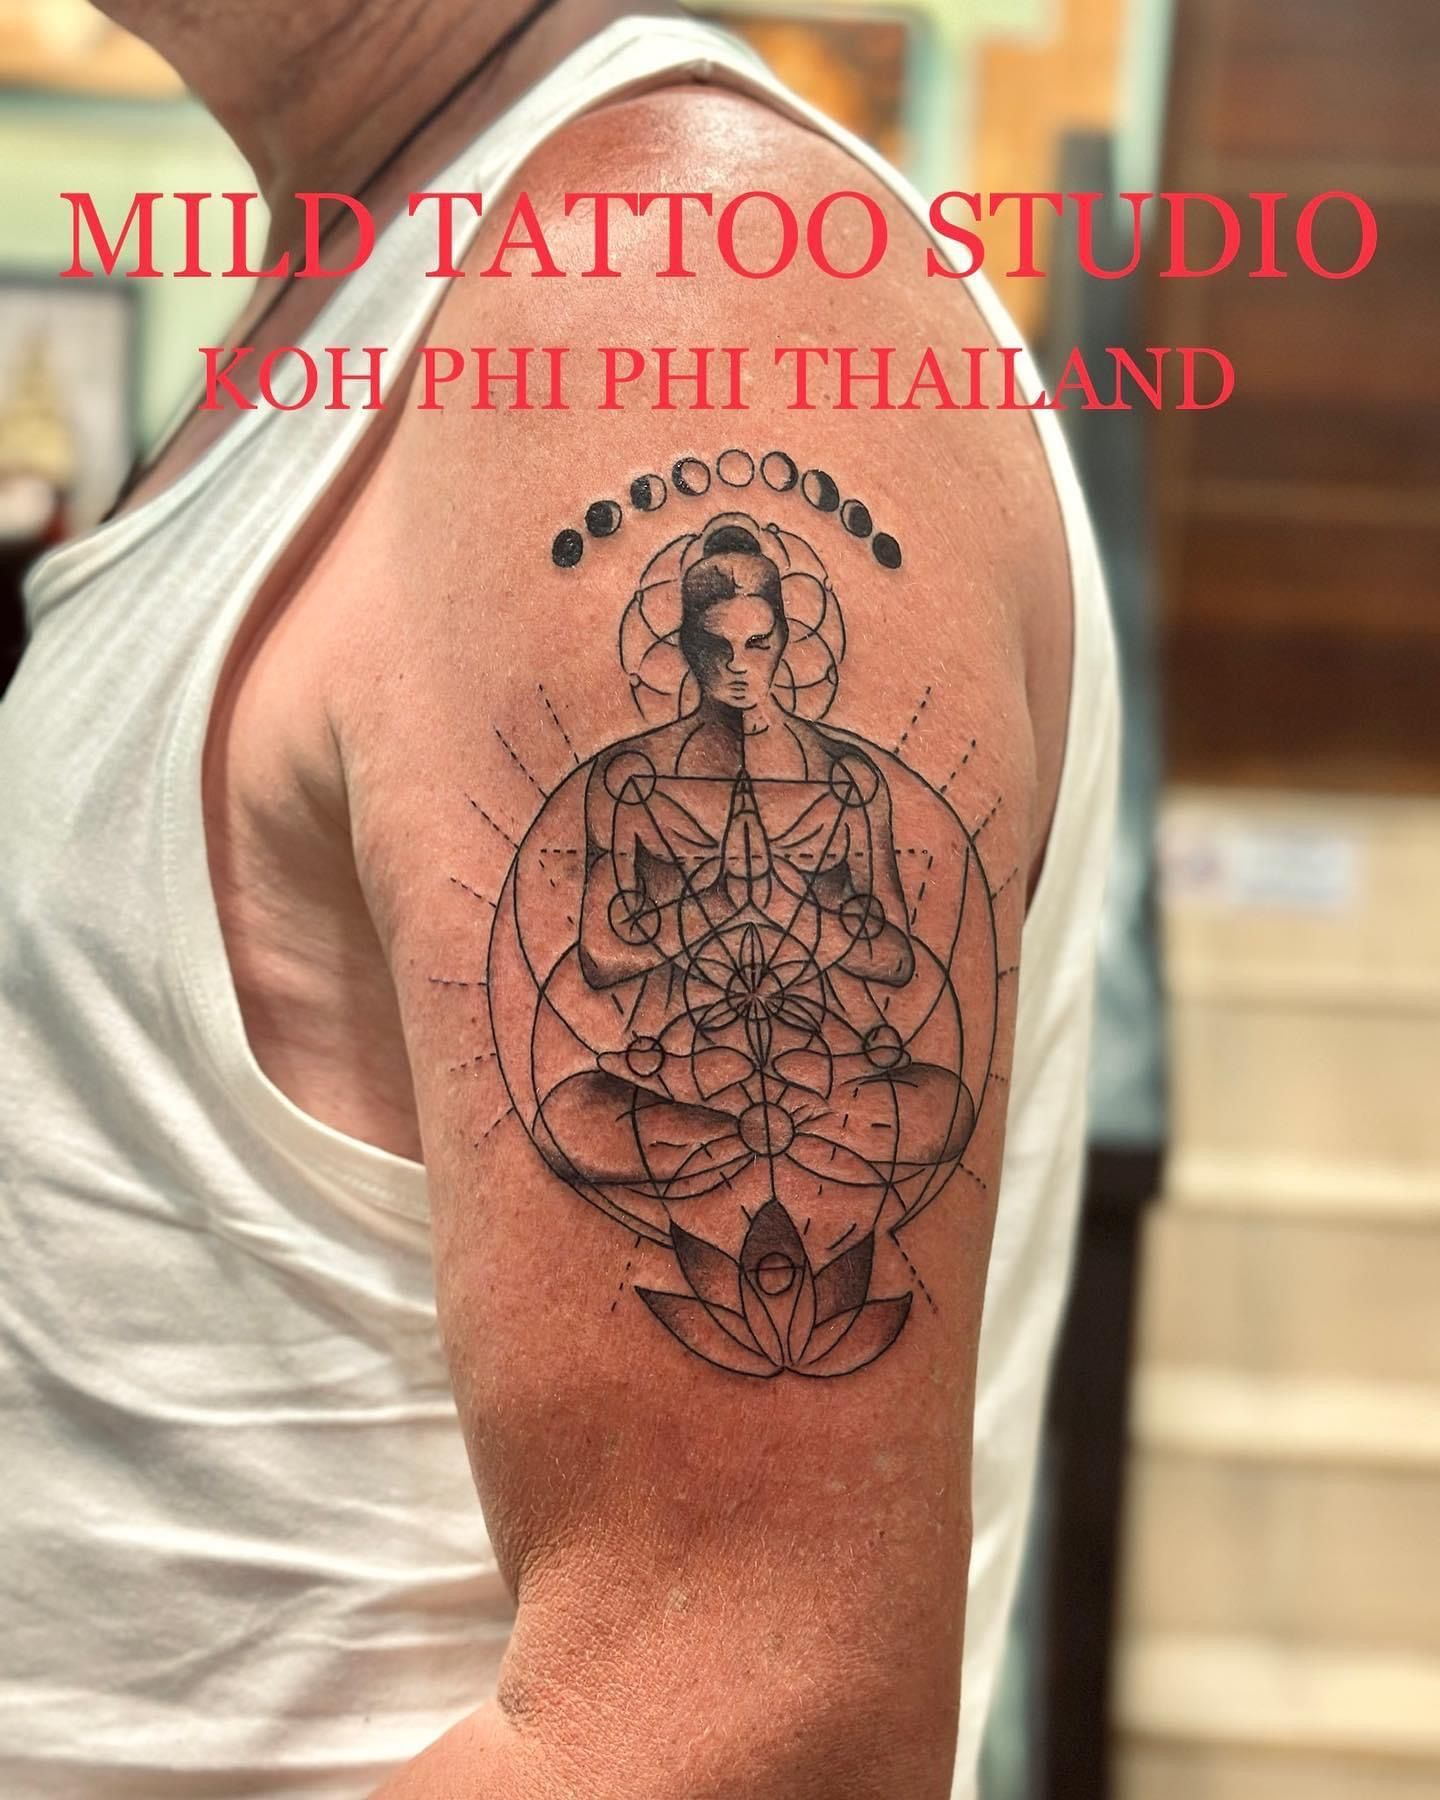 Top 5 Places to Get a Tattoo in Cape Town - The Cape Town Blog